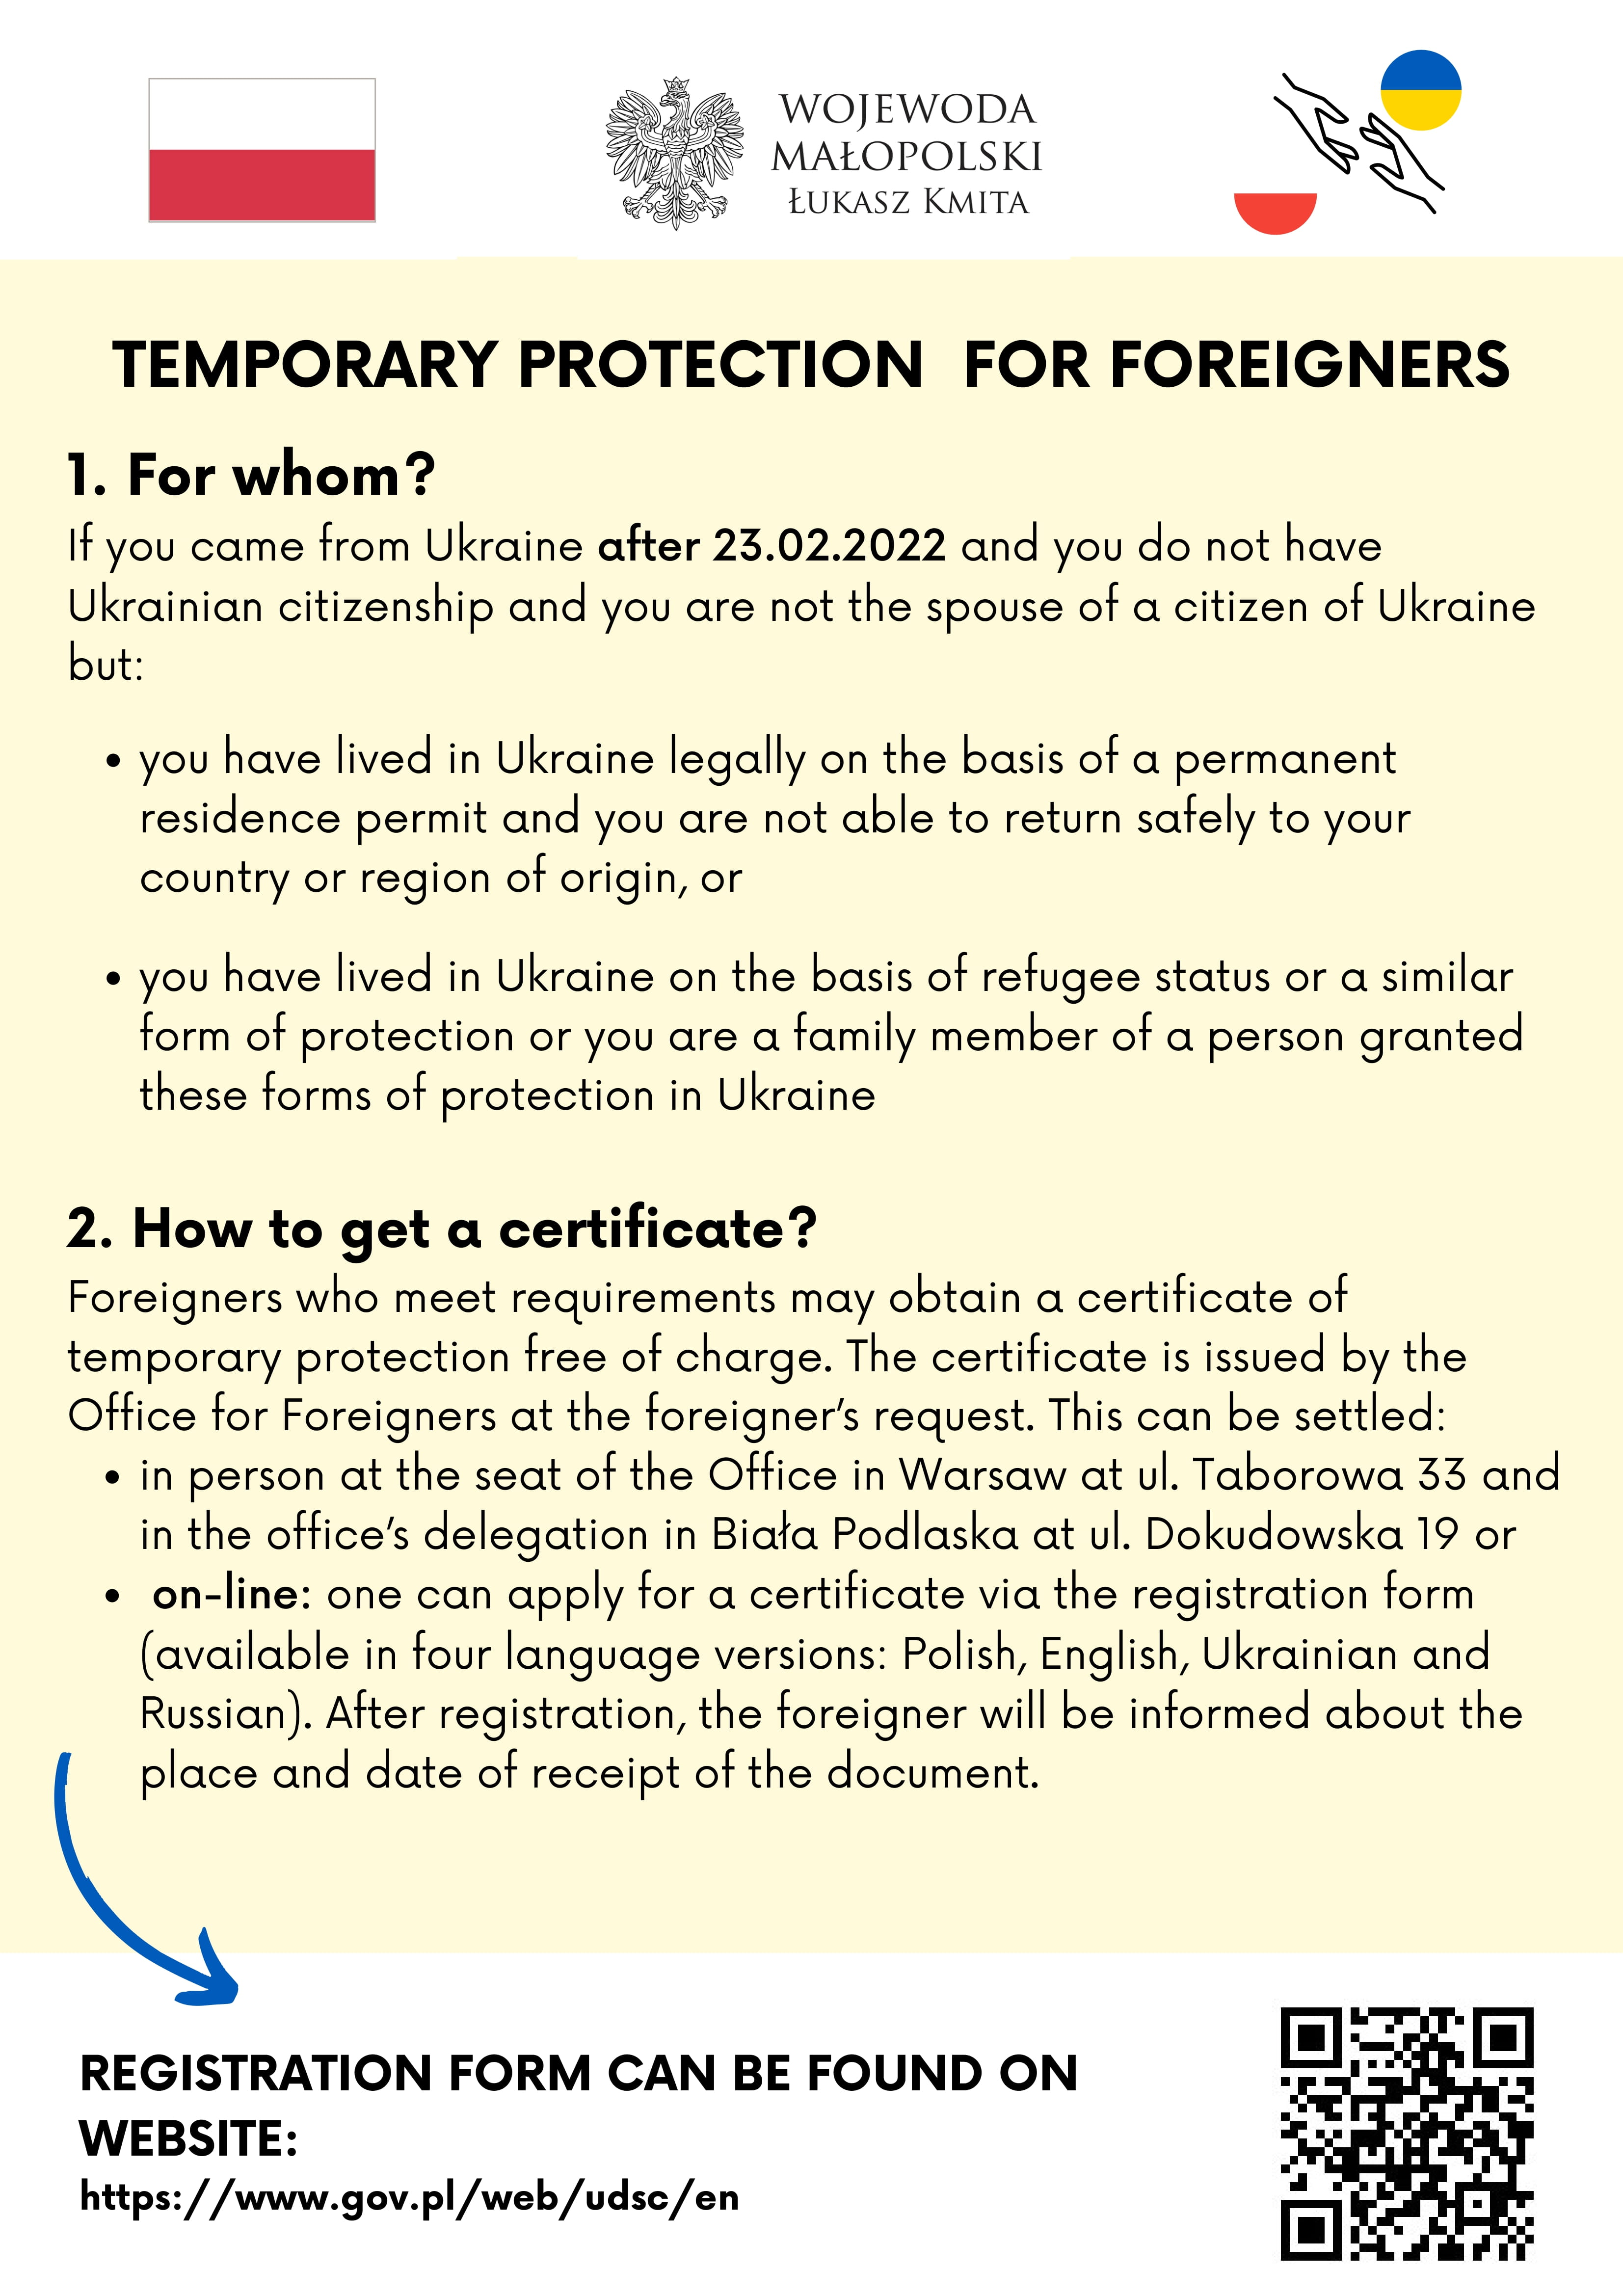 Temporary Protection for Foreginers

1. Whom it concerns?
If you came from Ukraine after 23.02.2022 and you do not have Ukrainian citizenship and you are not the spouse of a citizen of Ukraine but:
a) you have lived in Ukraine legally on the basis of a permanent residence permit and you are not able to return safely to your country or region of origin, or
b) you have lived in Ukraine on the basis of refugee status or a similar form of protection or you are a family member of a person granted these forms of protection in Ukraine
you may be entitled to temporary protection in Poland or in another European Union country in accordance with a European Union decision.
2. How to obtain a notification?
Foreigners who meet requirements may obtain a certificate of temporary protection free of charge. The certificate is issued by the Office for Foreigners at the foreigner’s request. This can be settled:
•	in person at the seat of the Office in Warsaw at ul. Taborowa 33 and in the office’s delegation in Biała Podlaska at ul. Dokudowska 19
•	on-line to apply for a certificate - the registration form is available in four language versions: Polish, English, Ukrainian and Russian. After registration, the foreigner will be informed about the place and date of receipt of the document.
